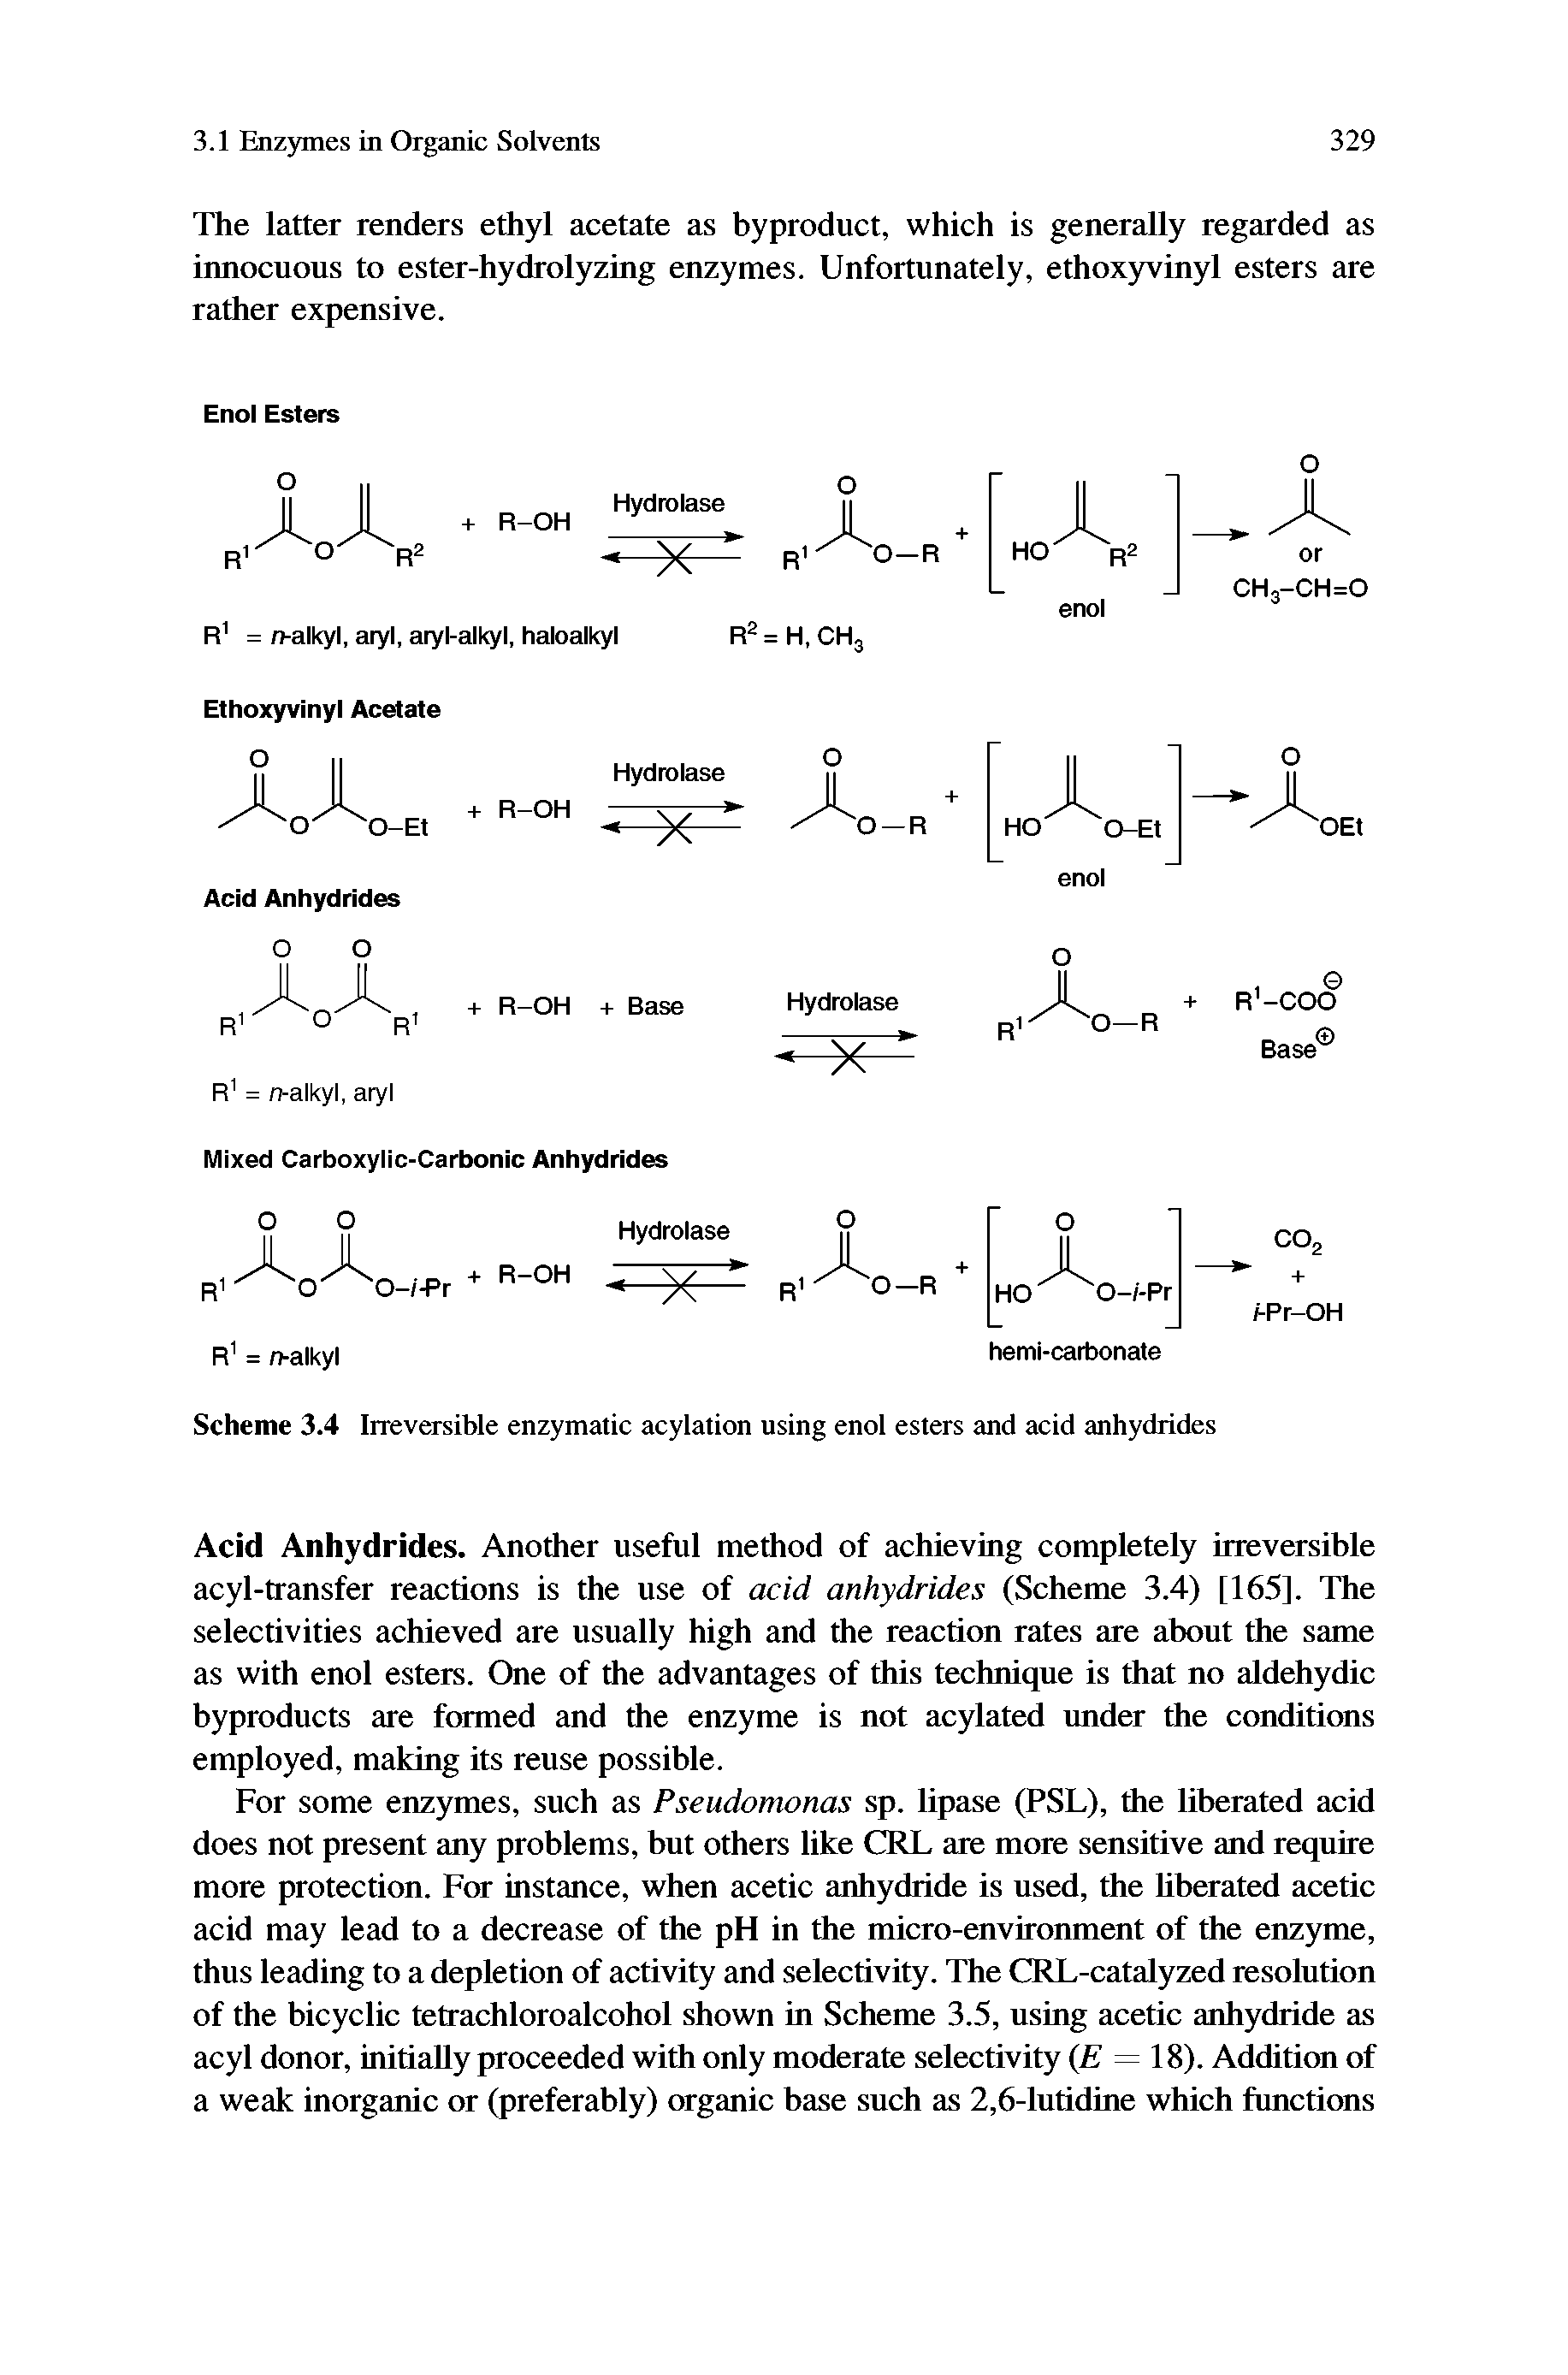 Scheme 3.4 Irreversible enzymatic acylation using enol esters and acid anhydrides...